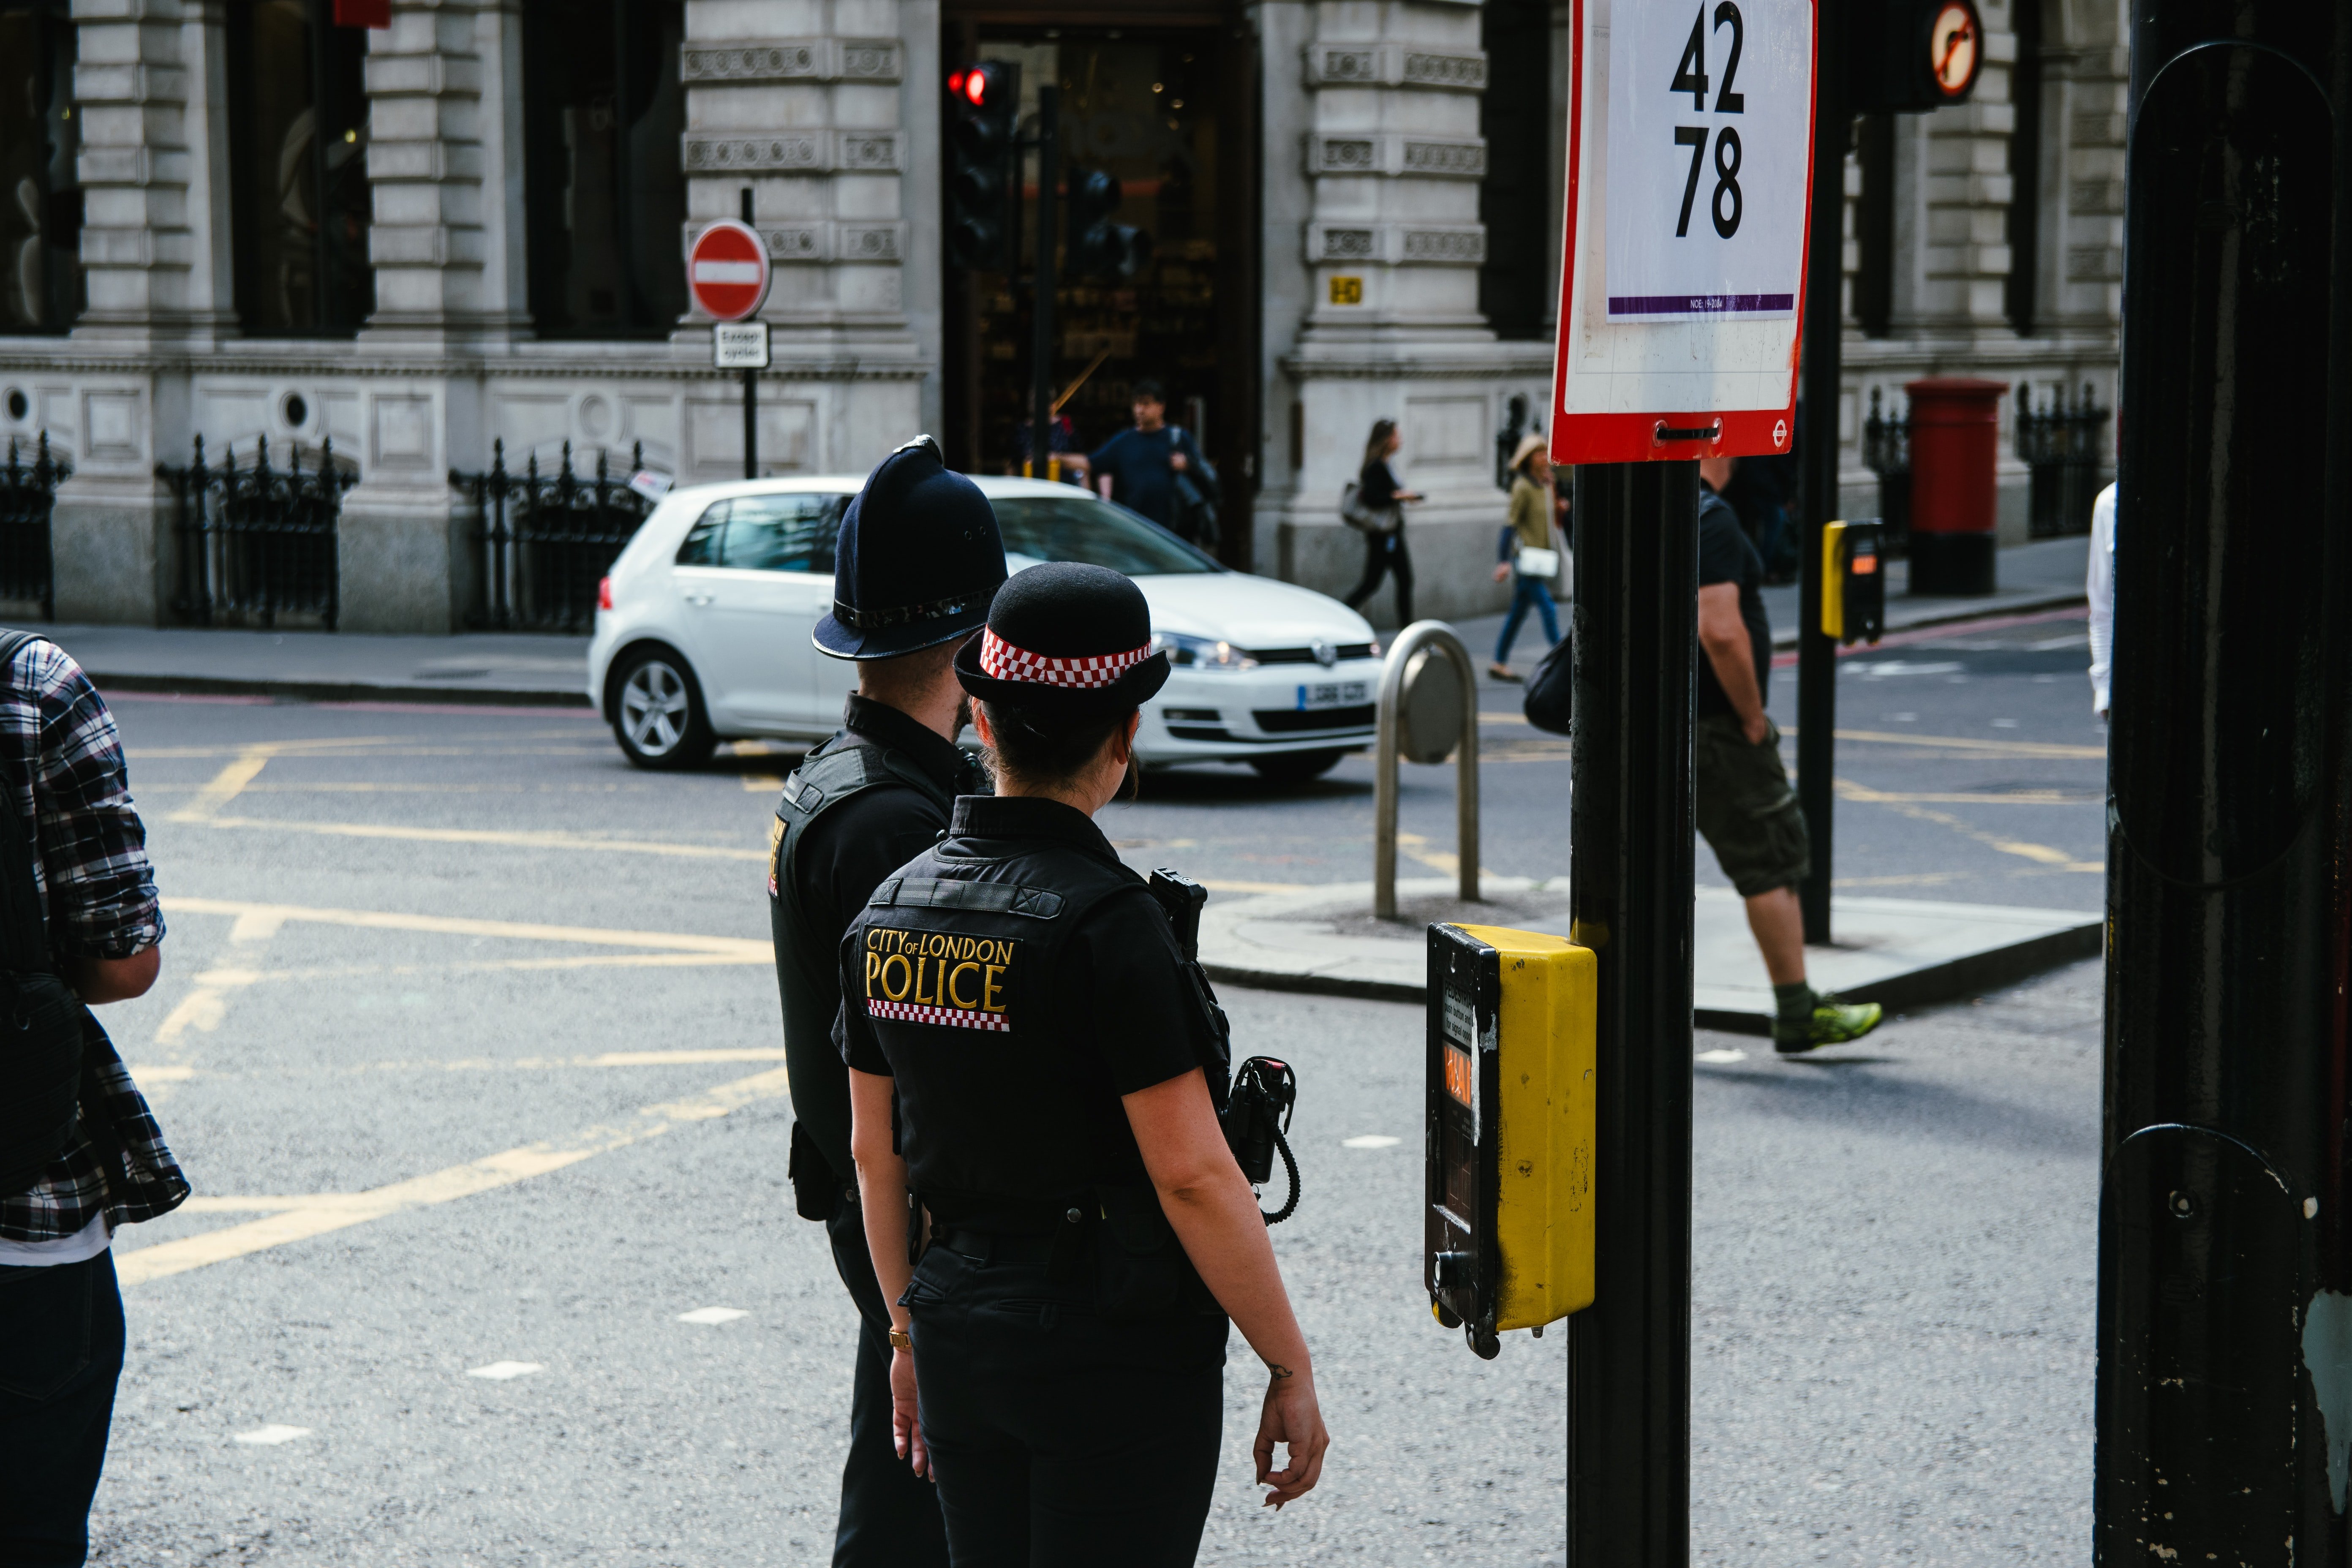 Photo of police officers on the street | Source: Unsplash